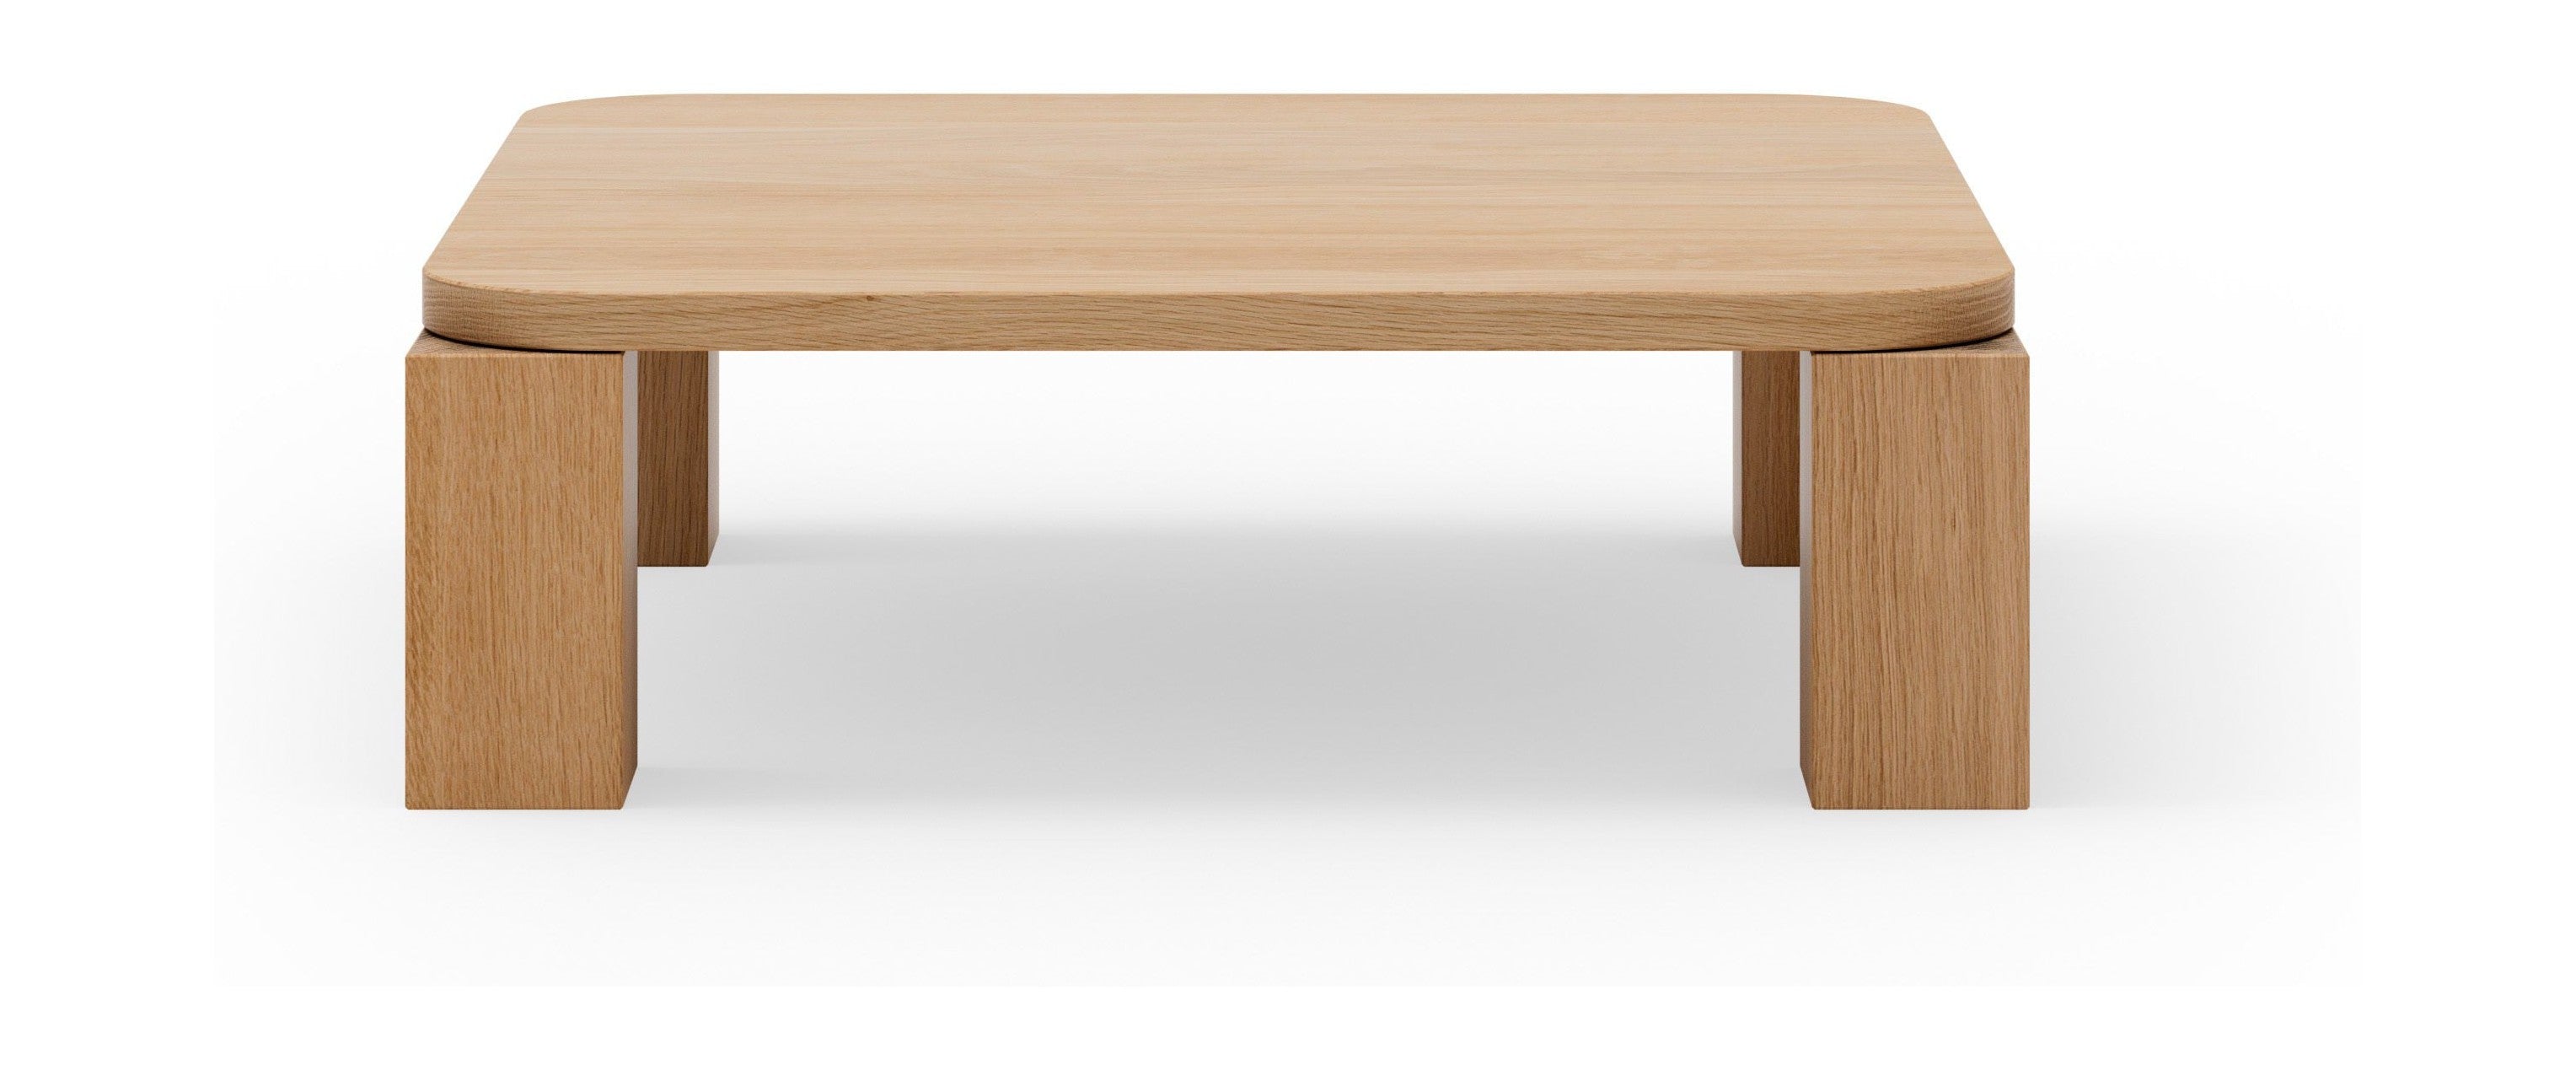 New Works Atlas Coffee Table Natural Oak, 60x60 Cm